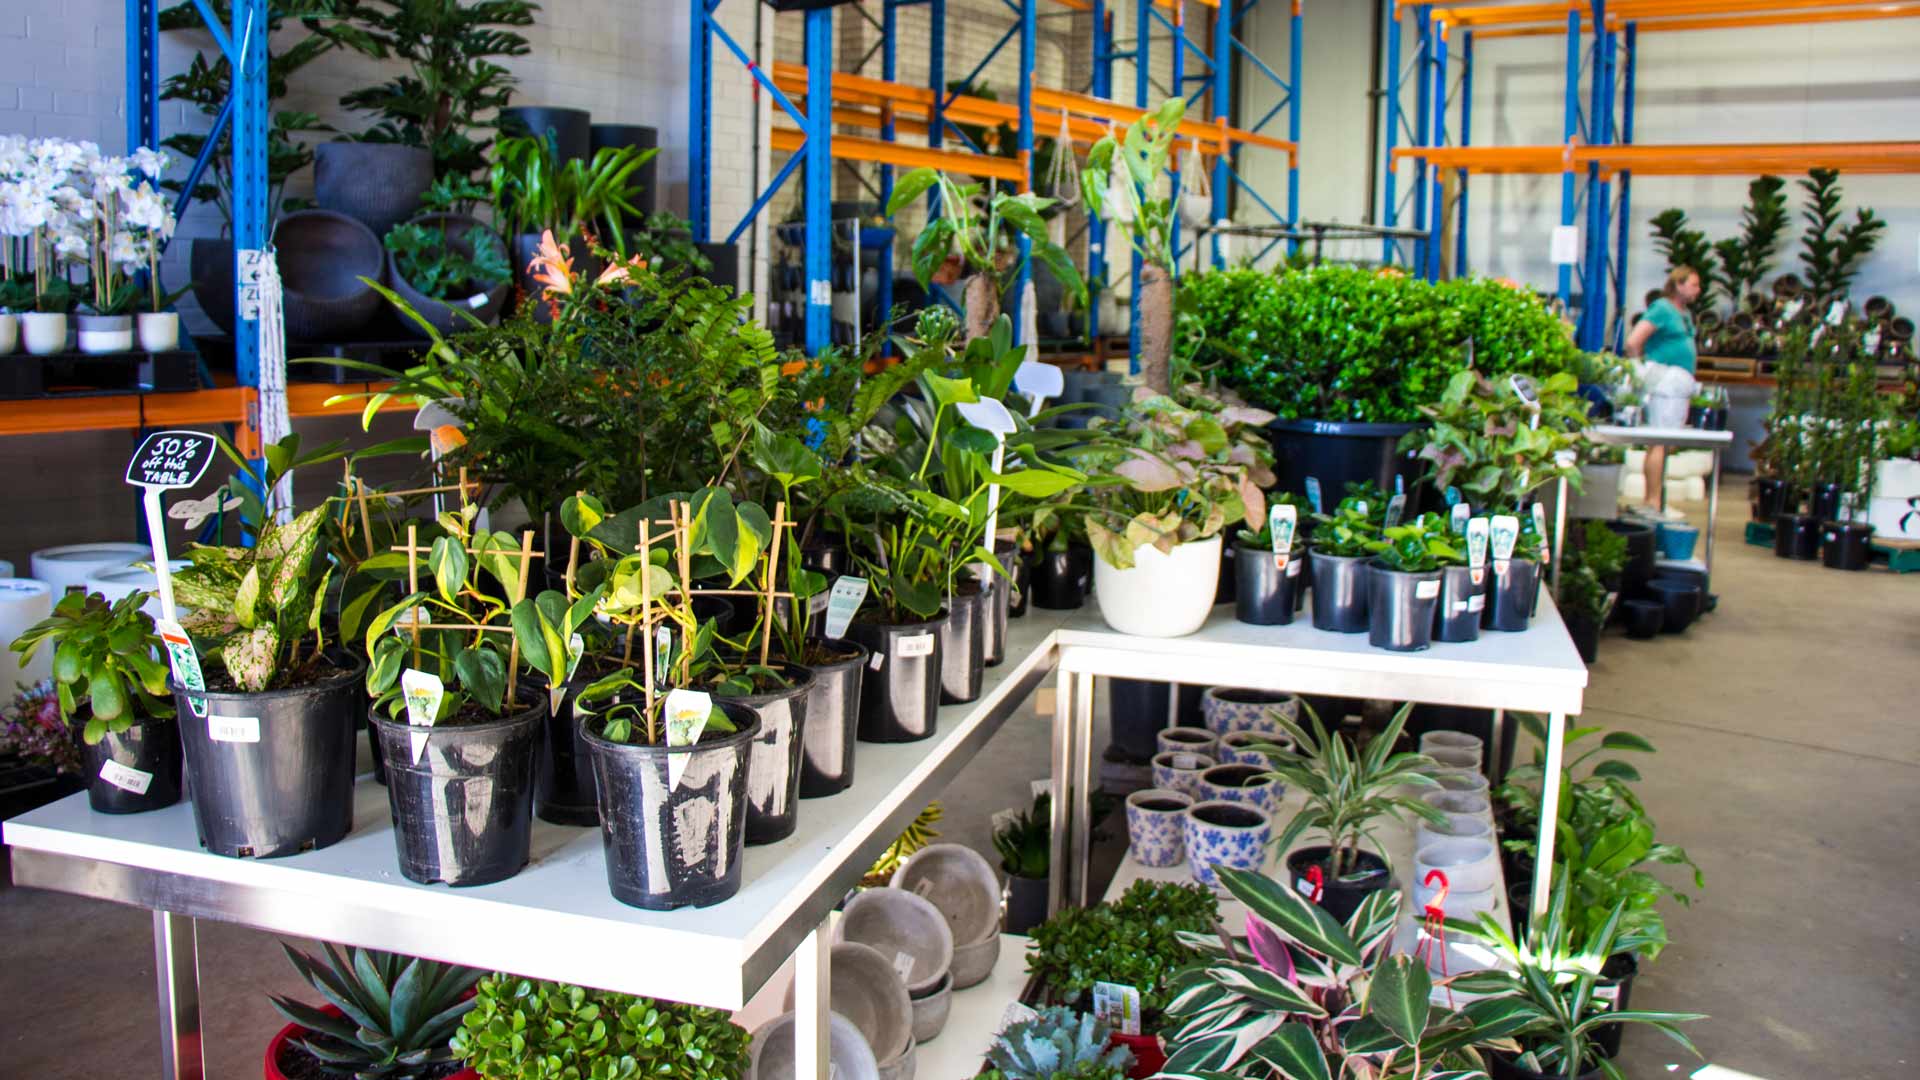 Plant Base Is Sydney's Newest Nursery with Over 100 Different Indoor and Outdoor Species